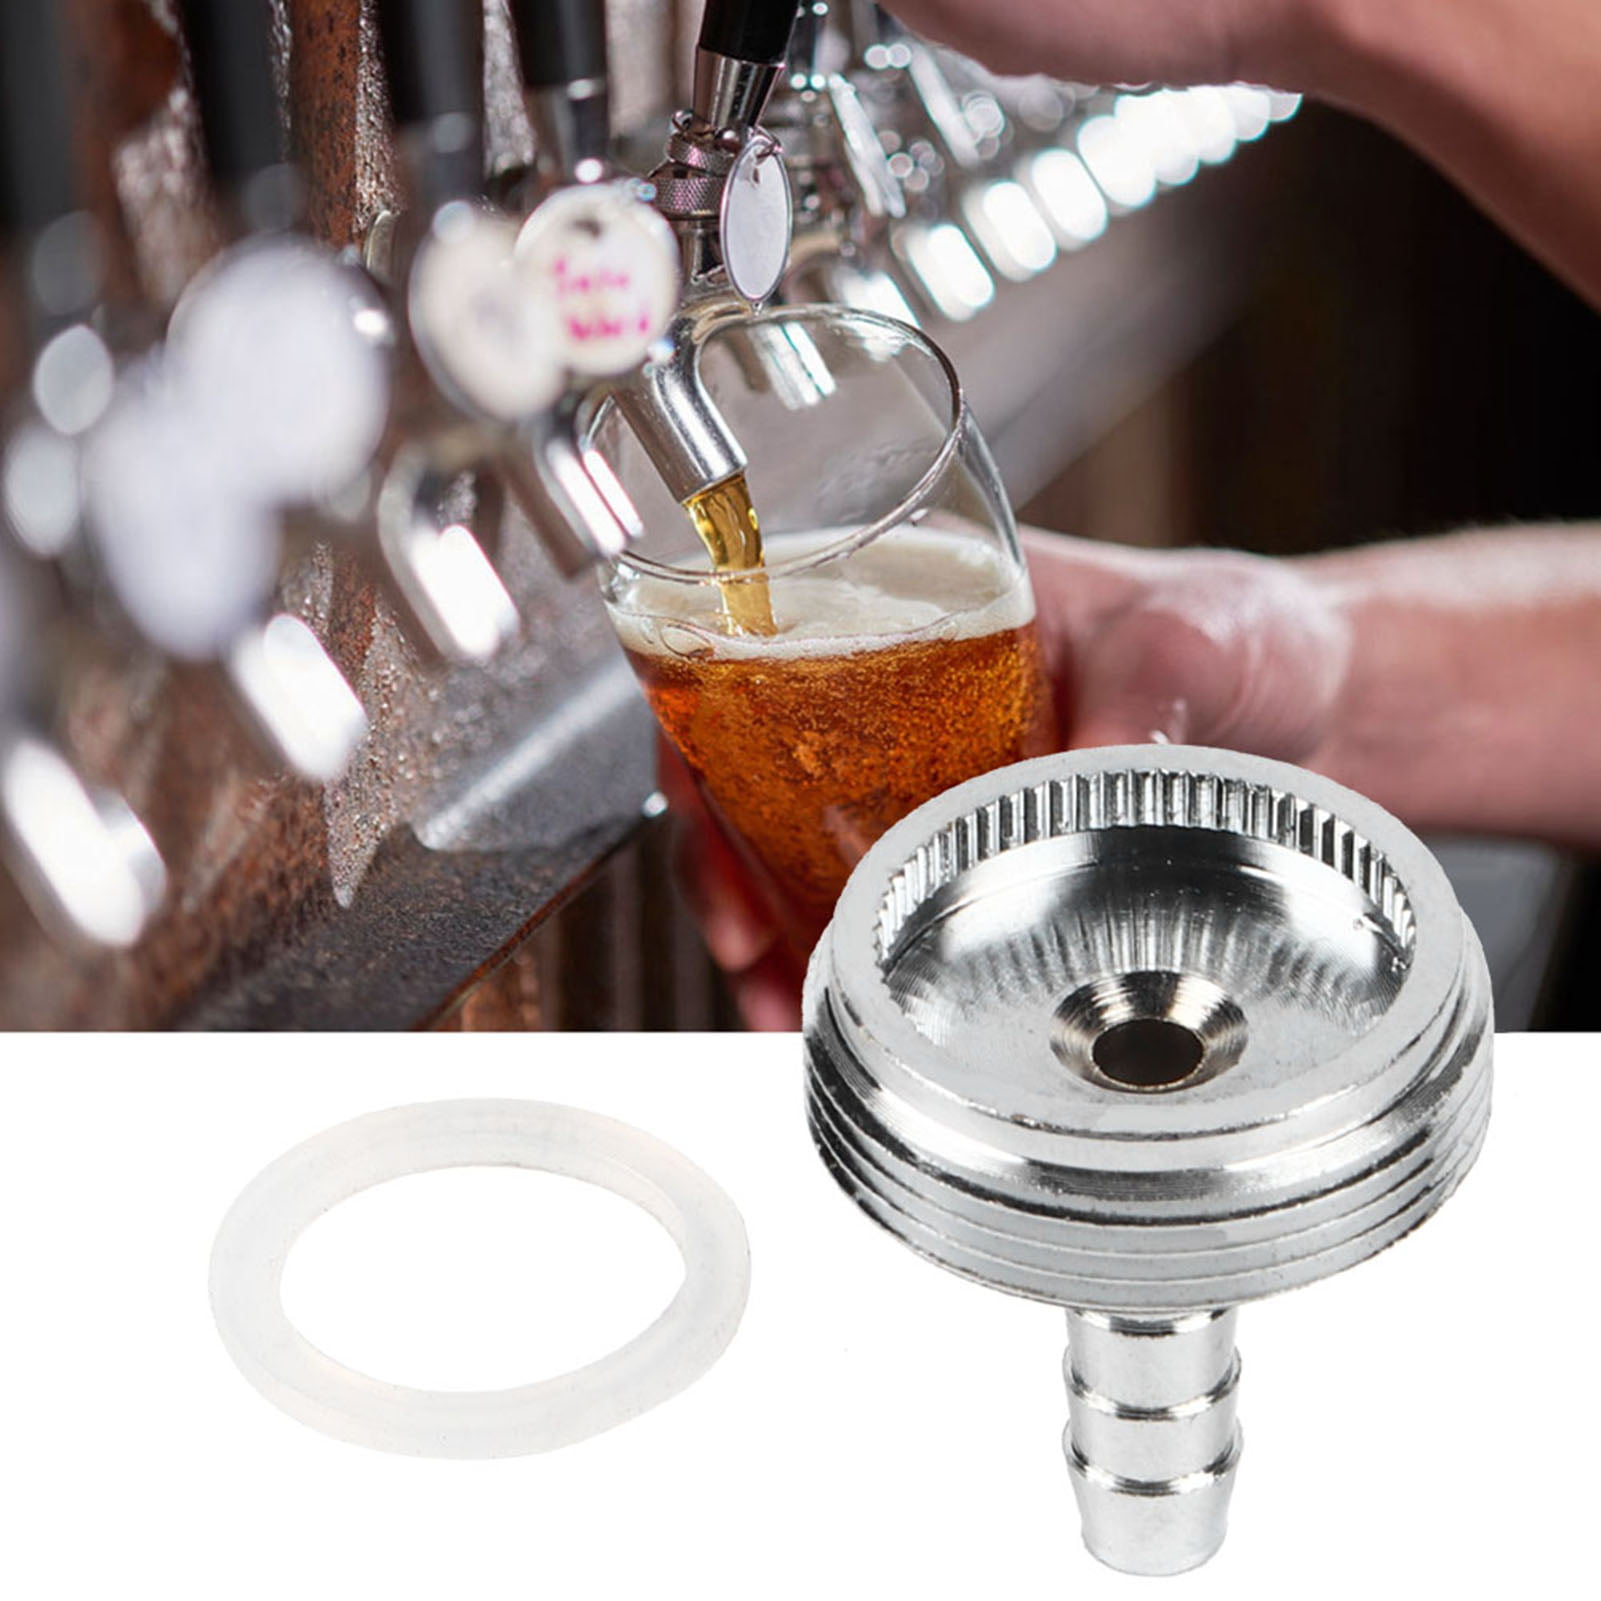 1/4 Beer Faucet Cleaning Attachment Beer Faucet Adapter Cleaning Accessories New 